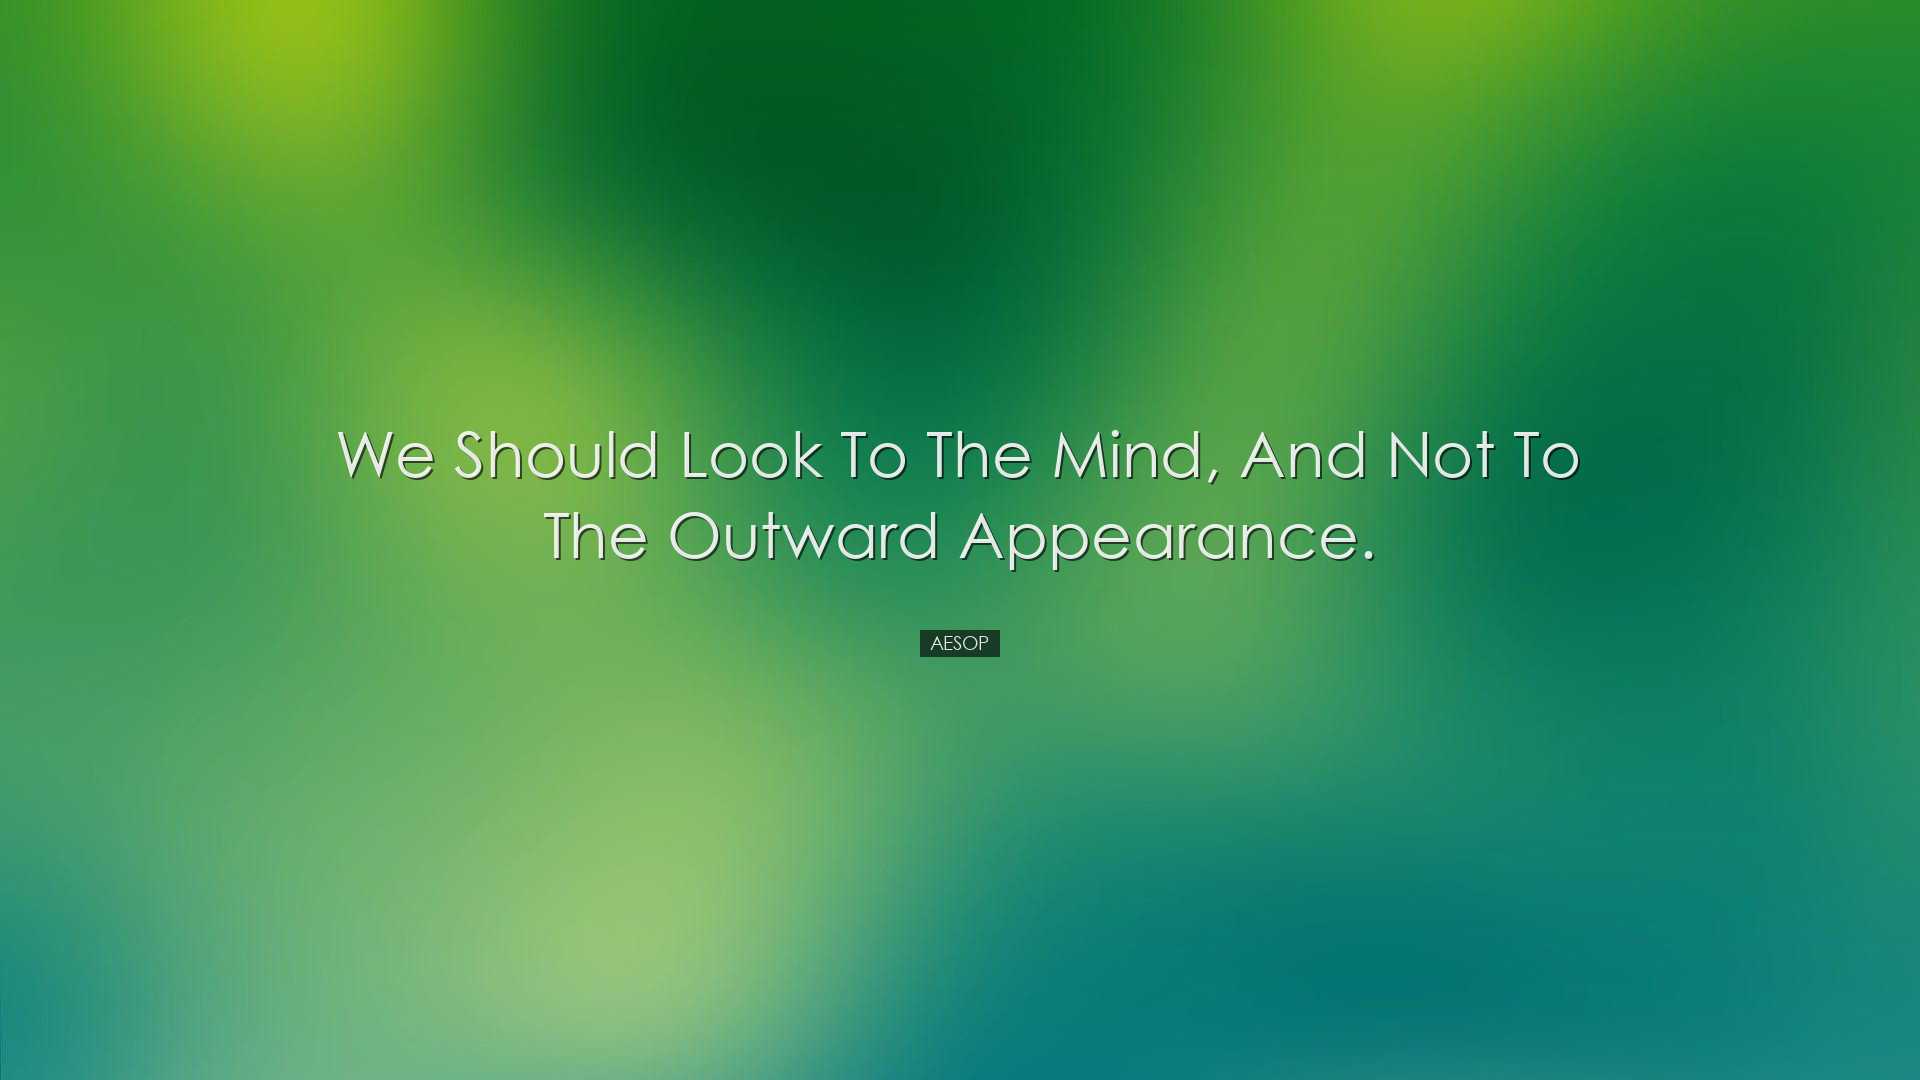 We should look to the mind, and not to the outward appearance. - A